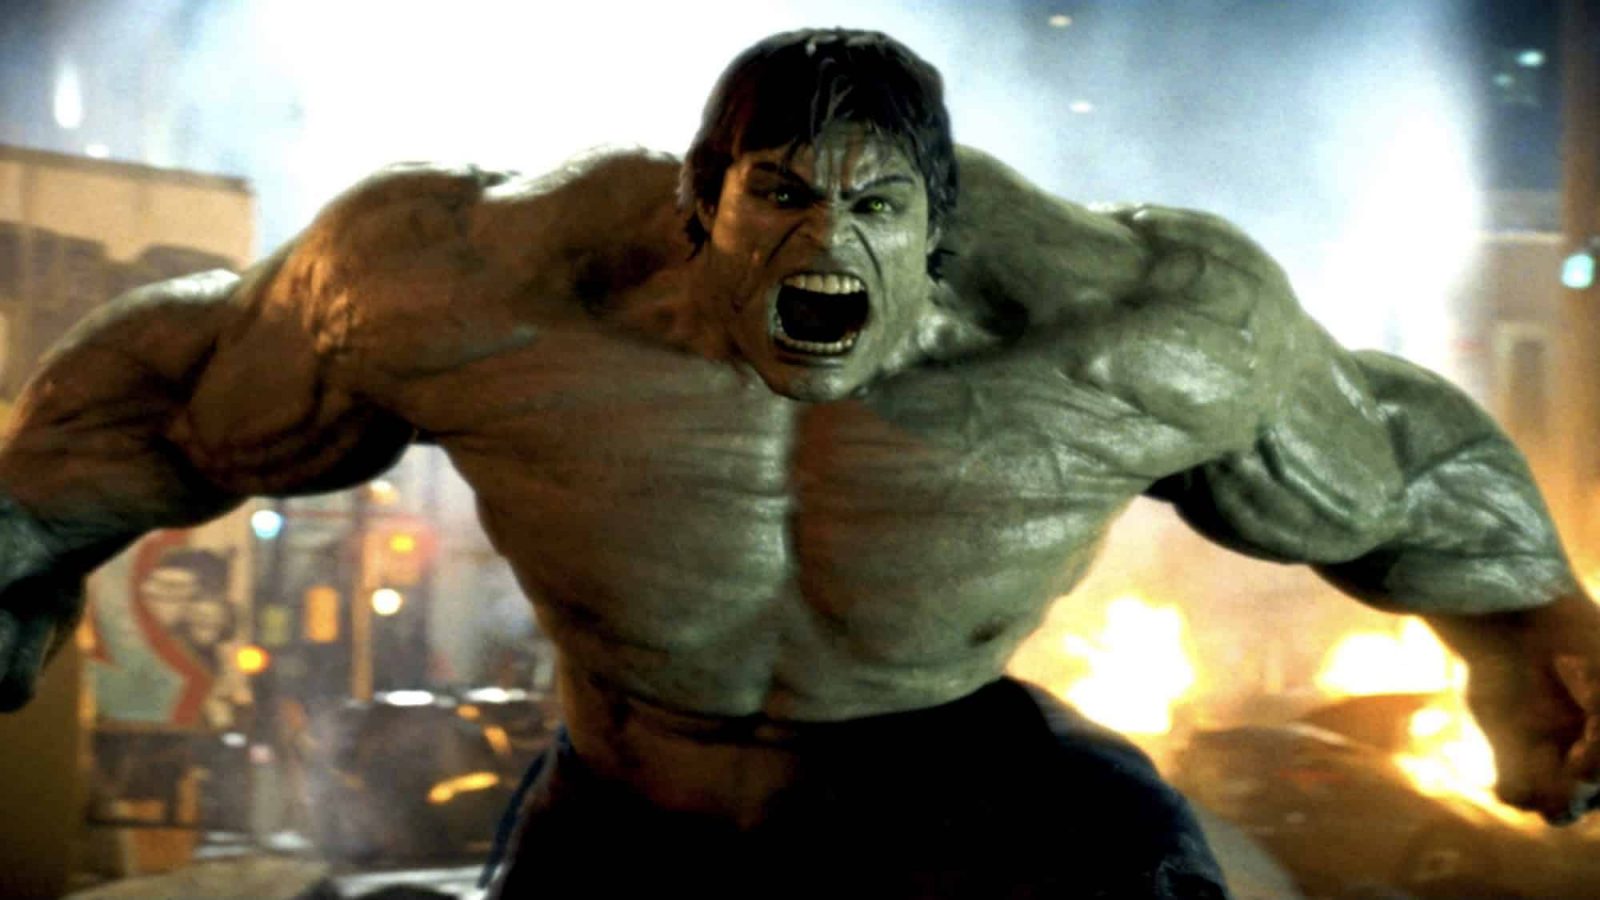 Den uoverkommelige-Hulk-Gets-Angry-in-Phase-1-of-the-Marvel-Cinematic-Universe